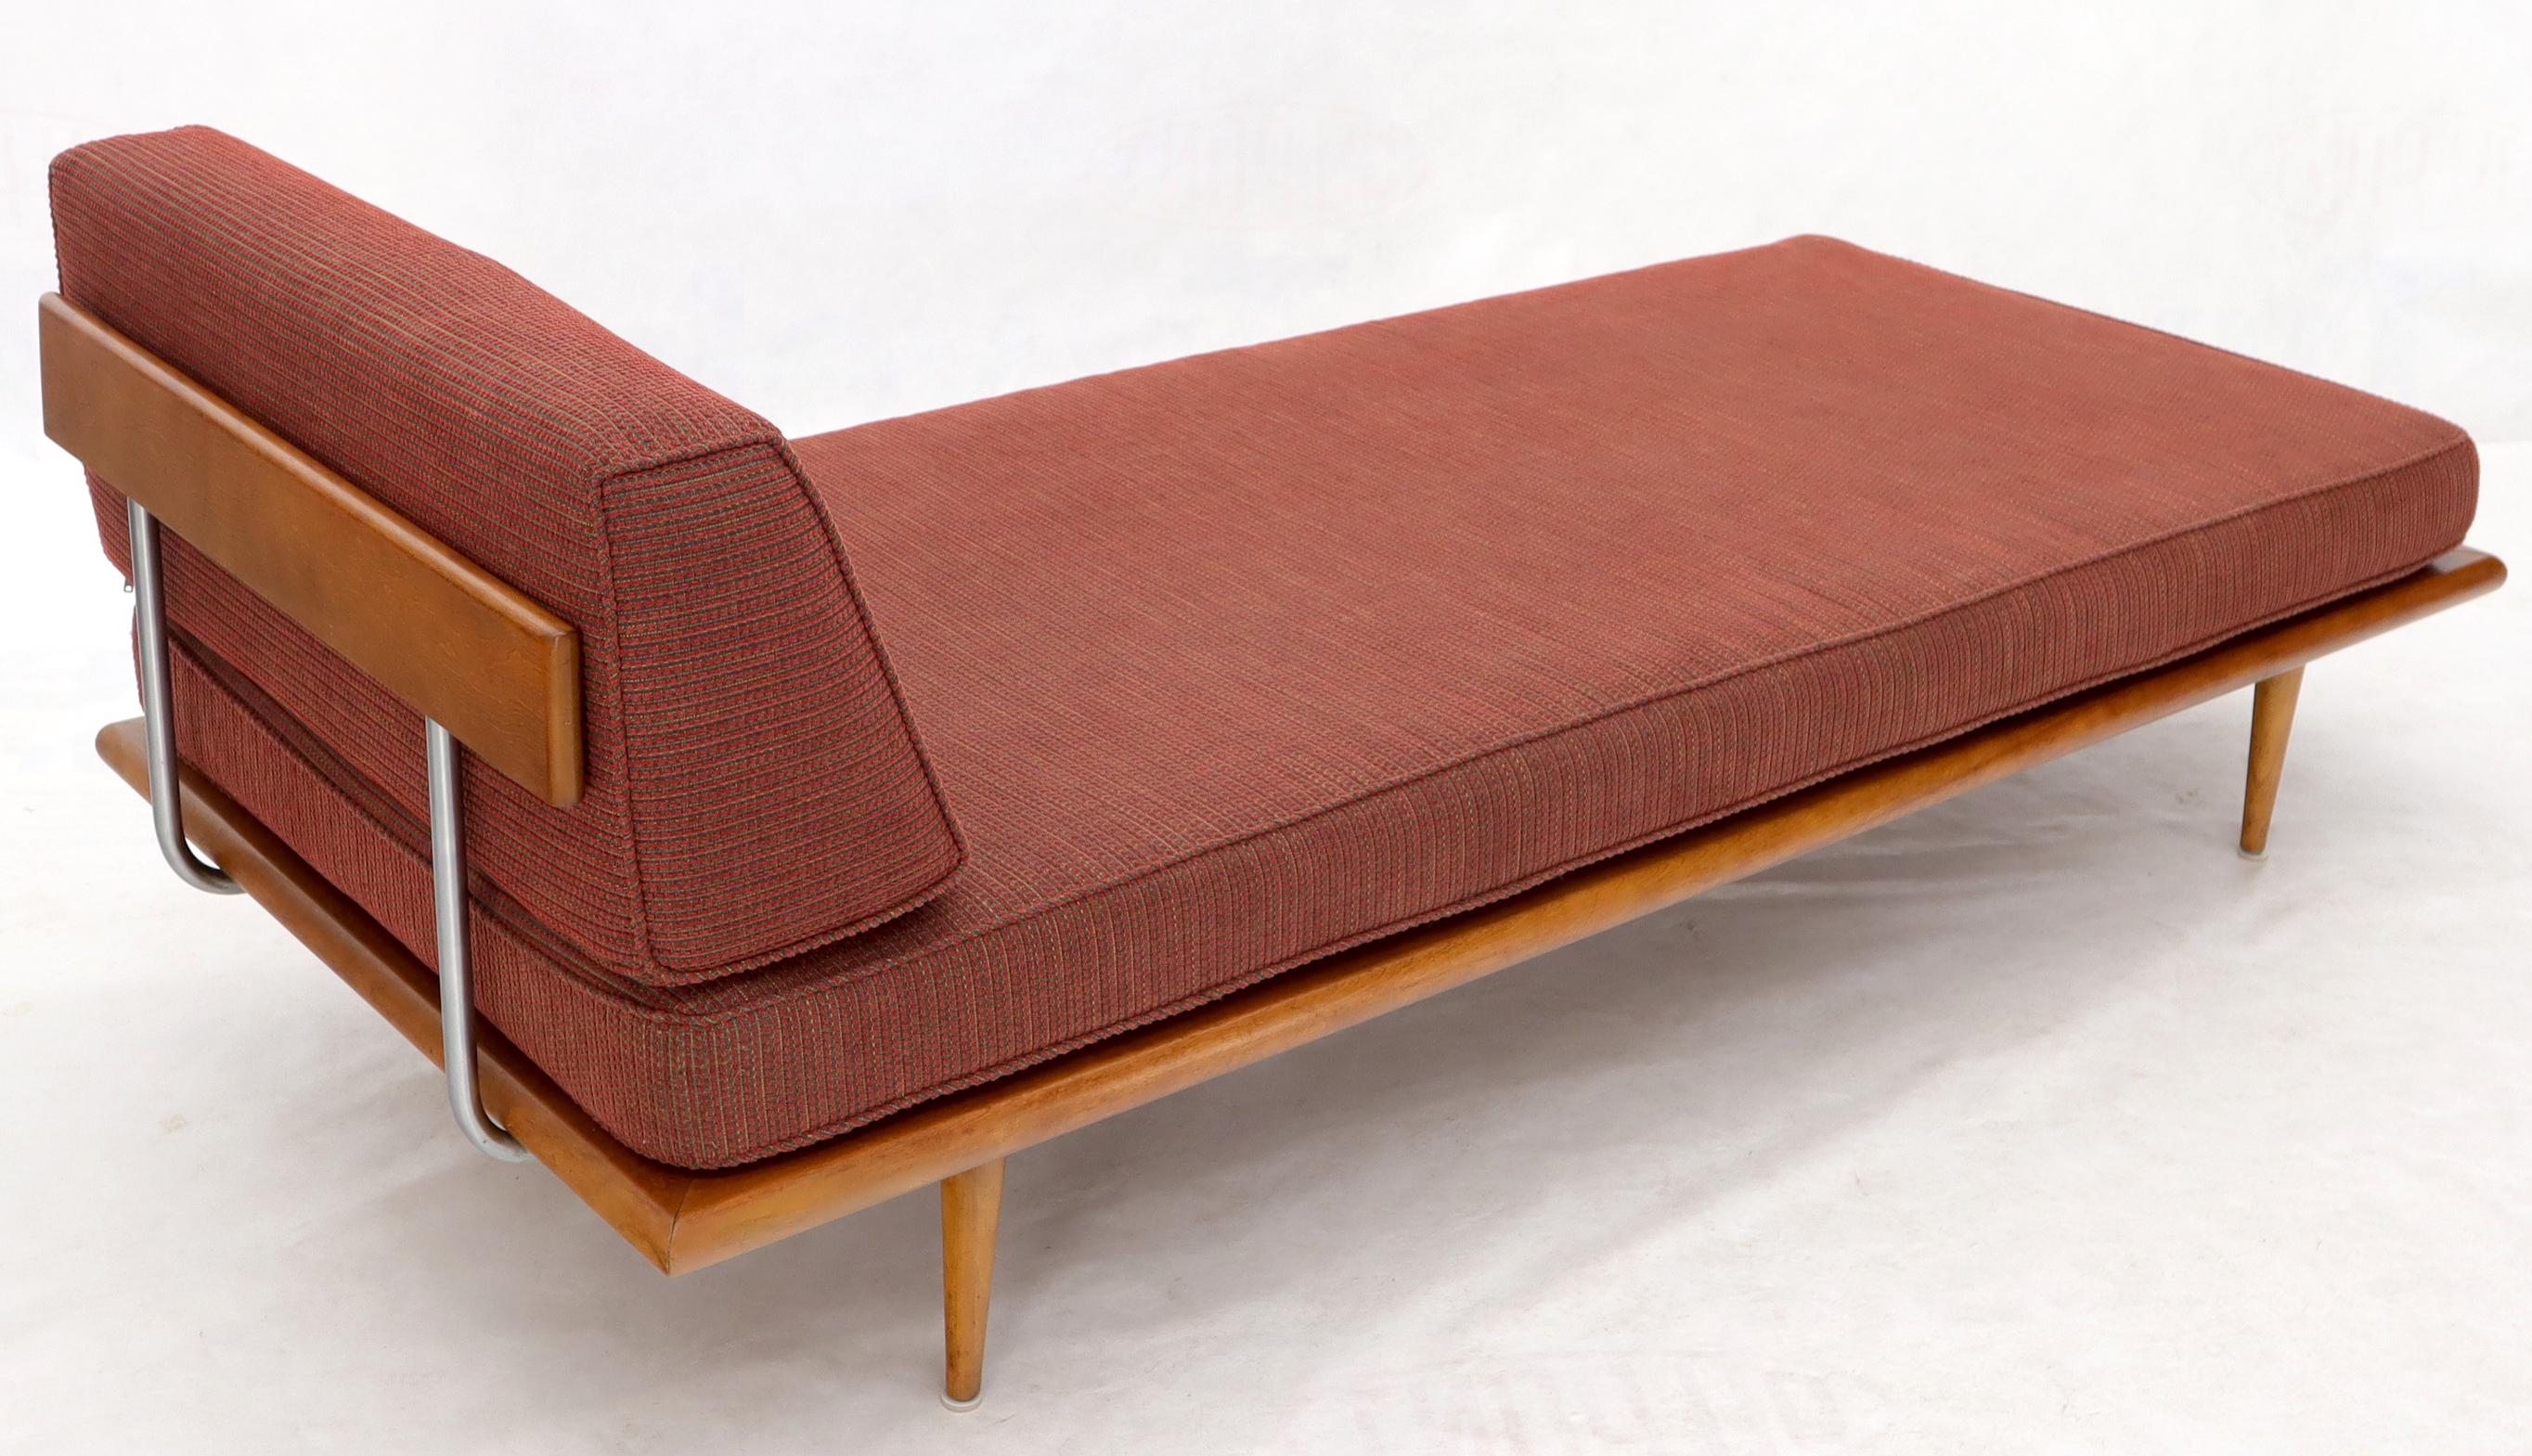 American Vintage George Nelson for Herman Miller Daybed Cot Sofa Chaise Lounge